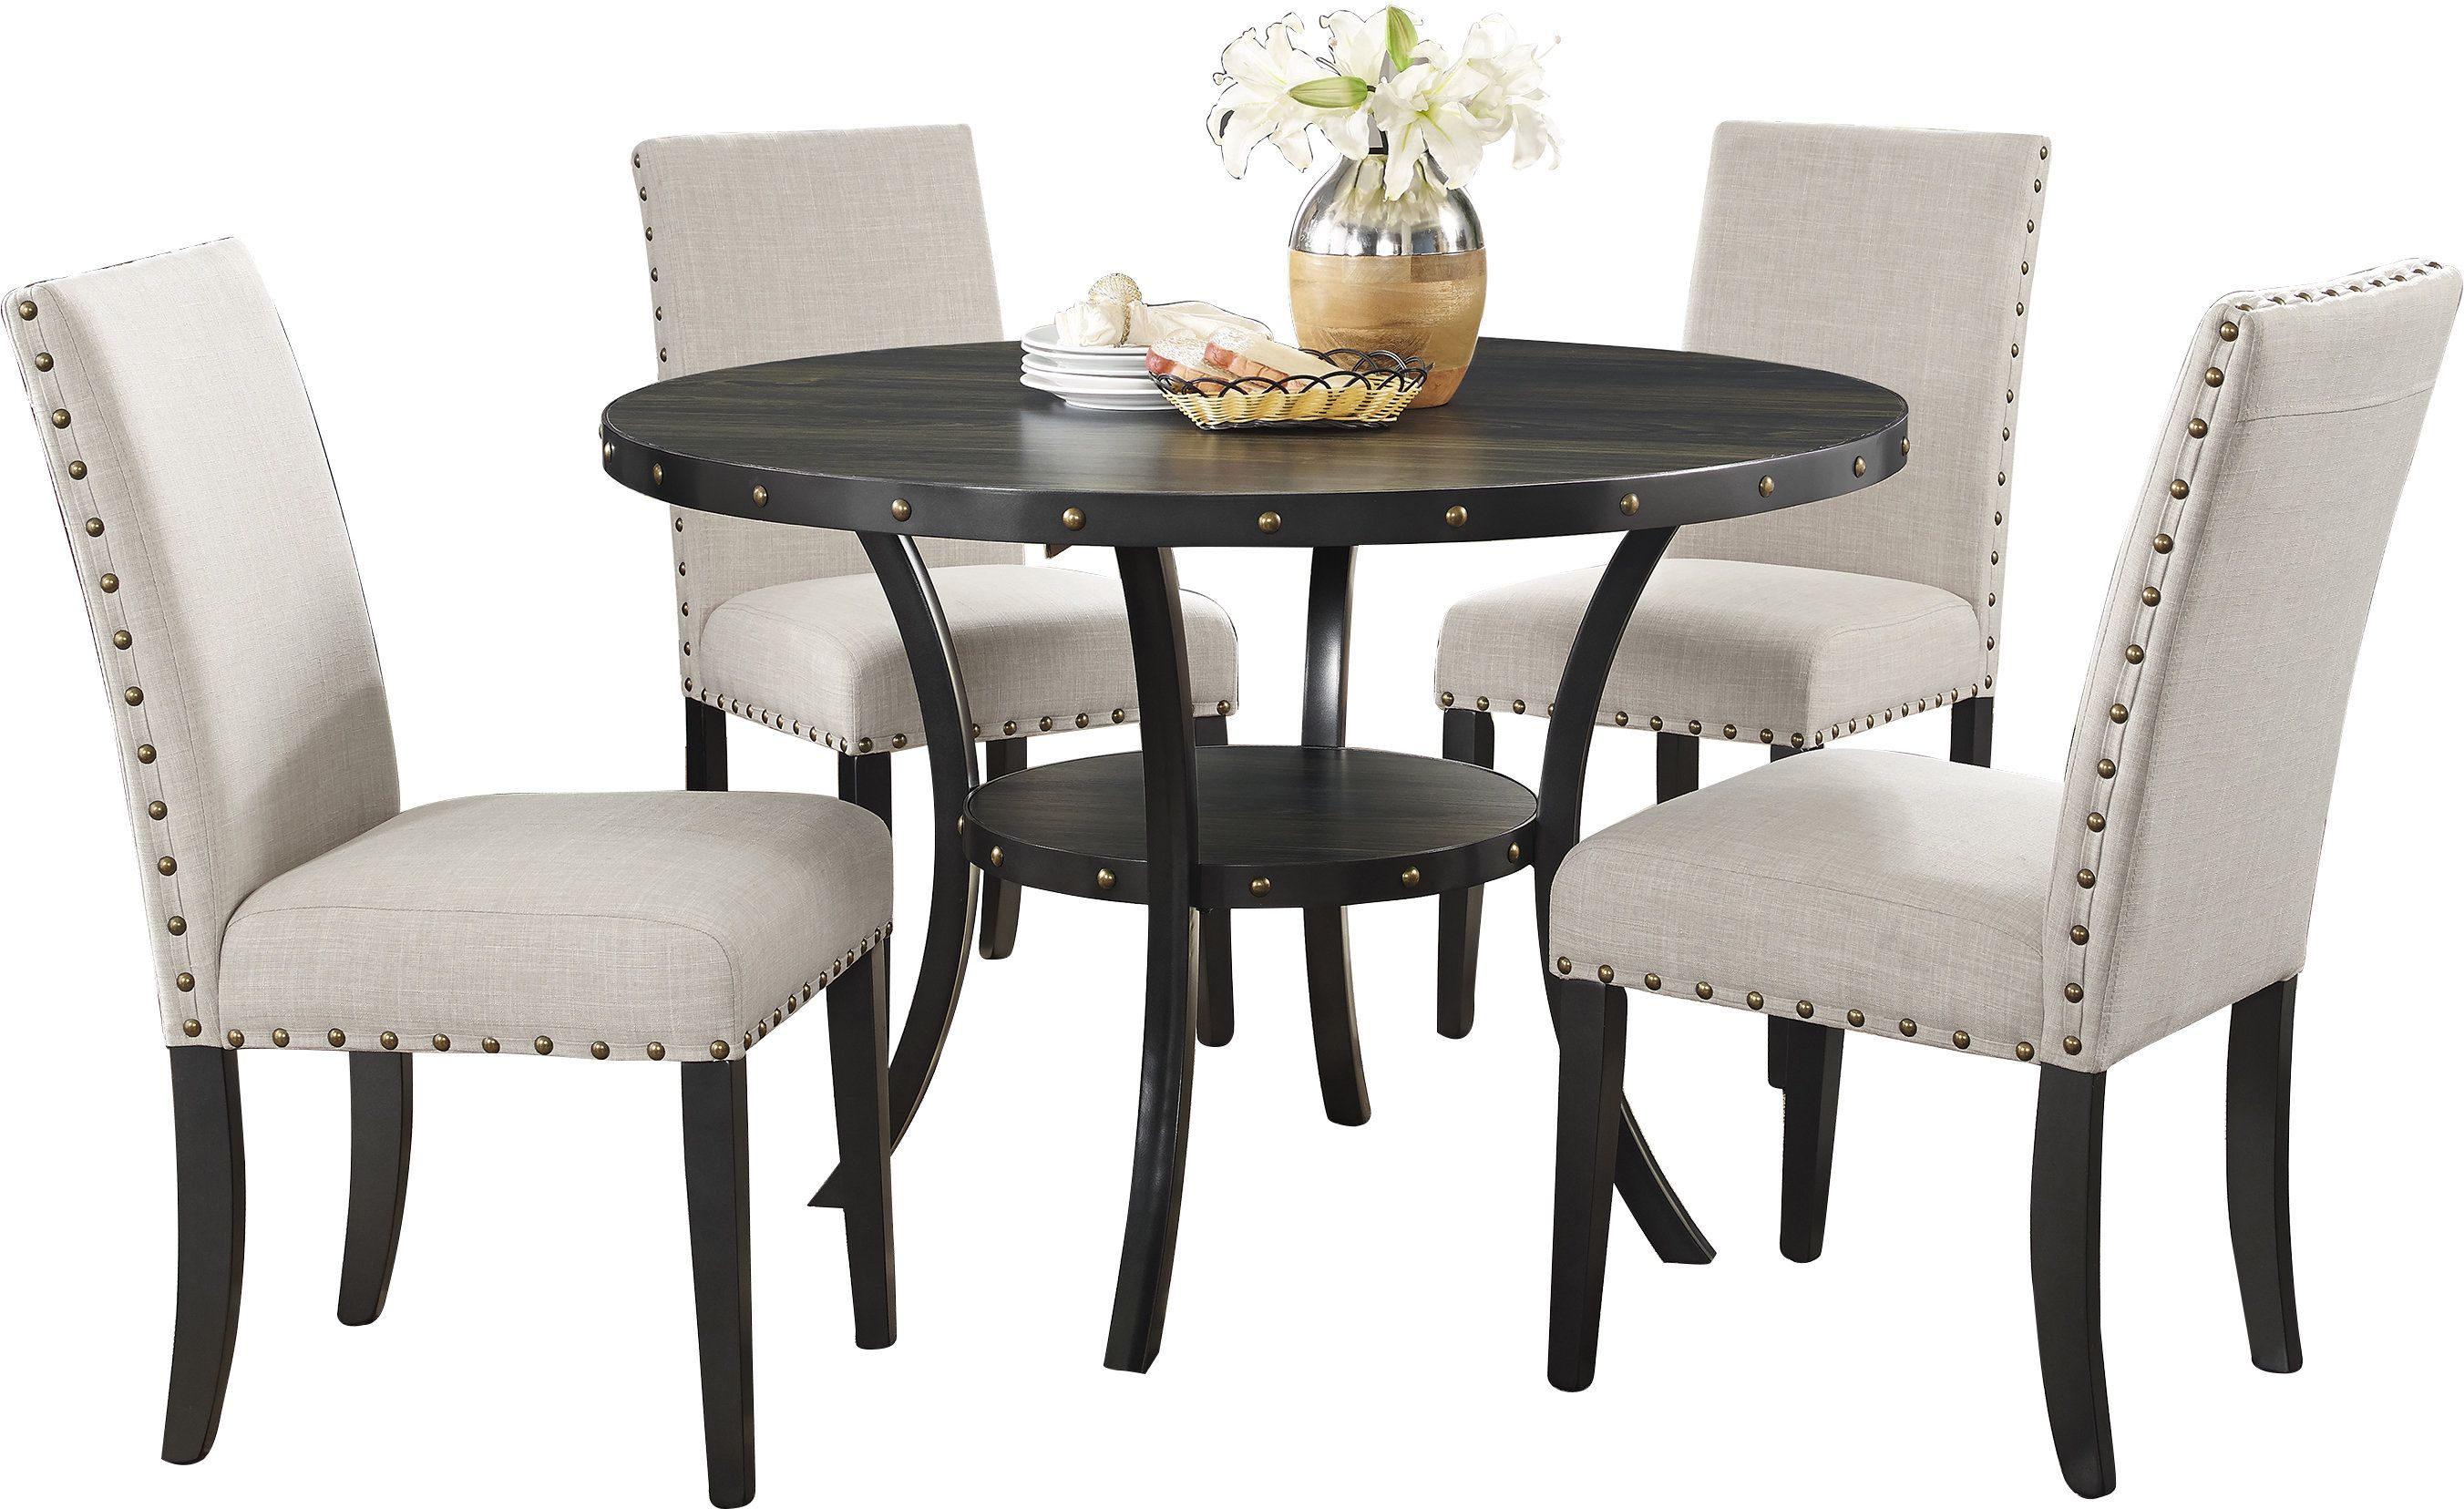 Gracie Oaks Amy 5 Piece Dining Set With Current Baxton Studio Keitaro 5 Piece Dining Sets (View 12 of 20)